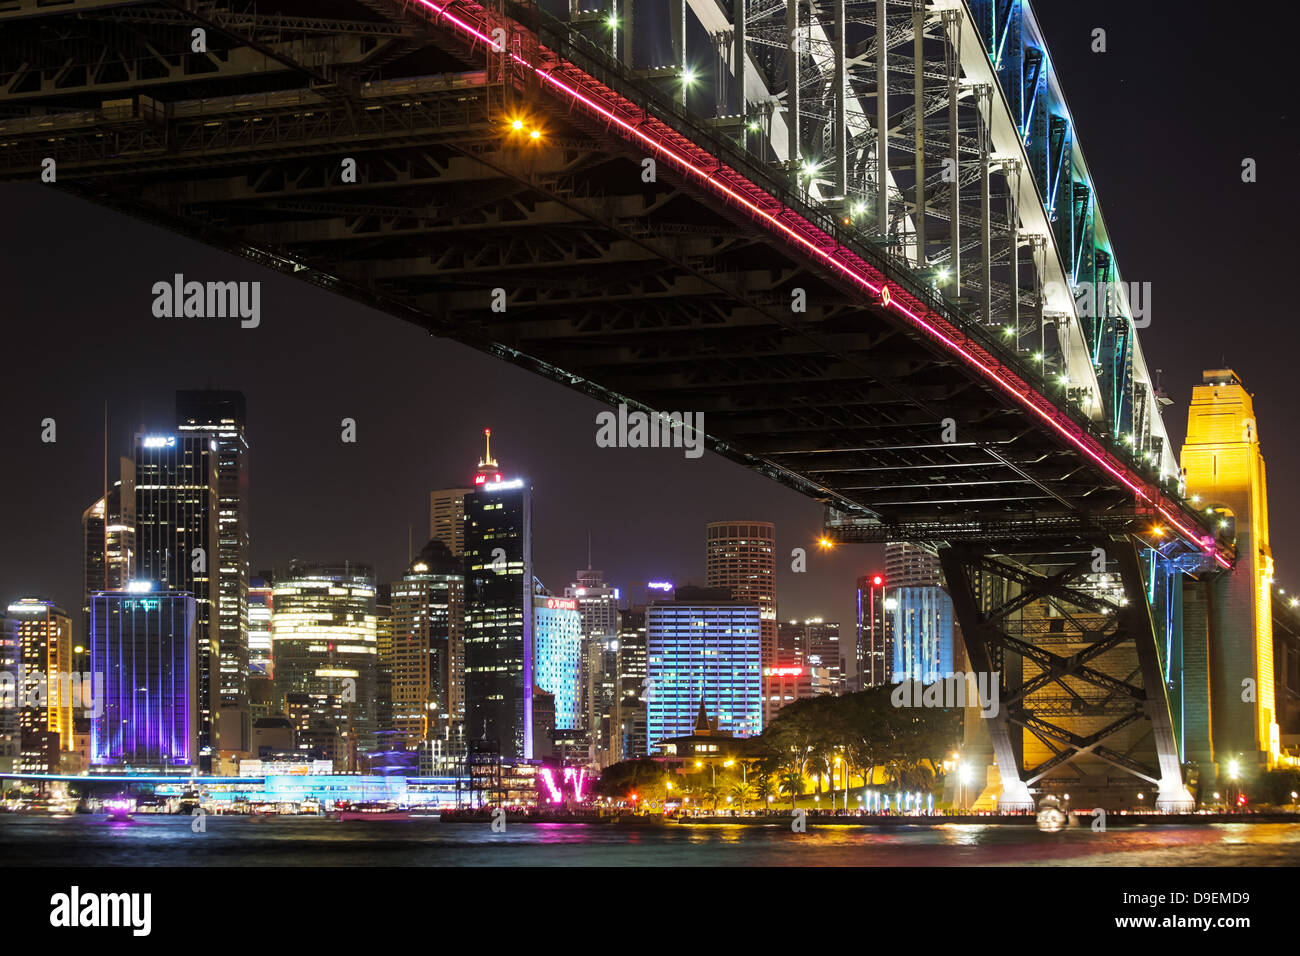 Wide angle view of the Sydney Harbour Bridge and Sydney's CBD at night during the annual Vivid Lighting Festival, Australia Stock Photo